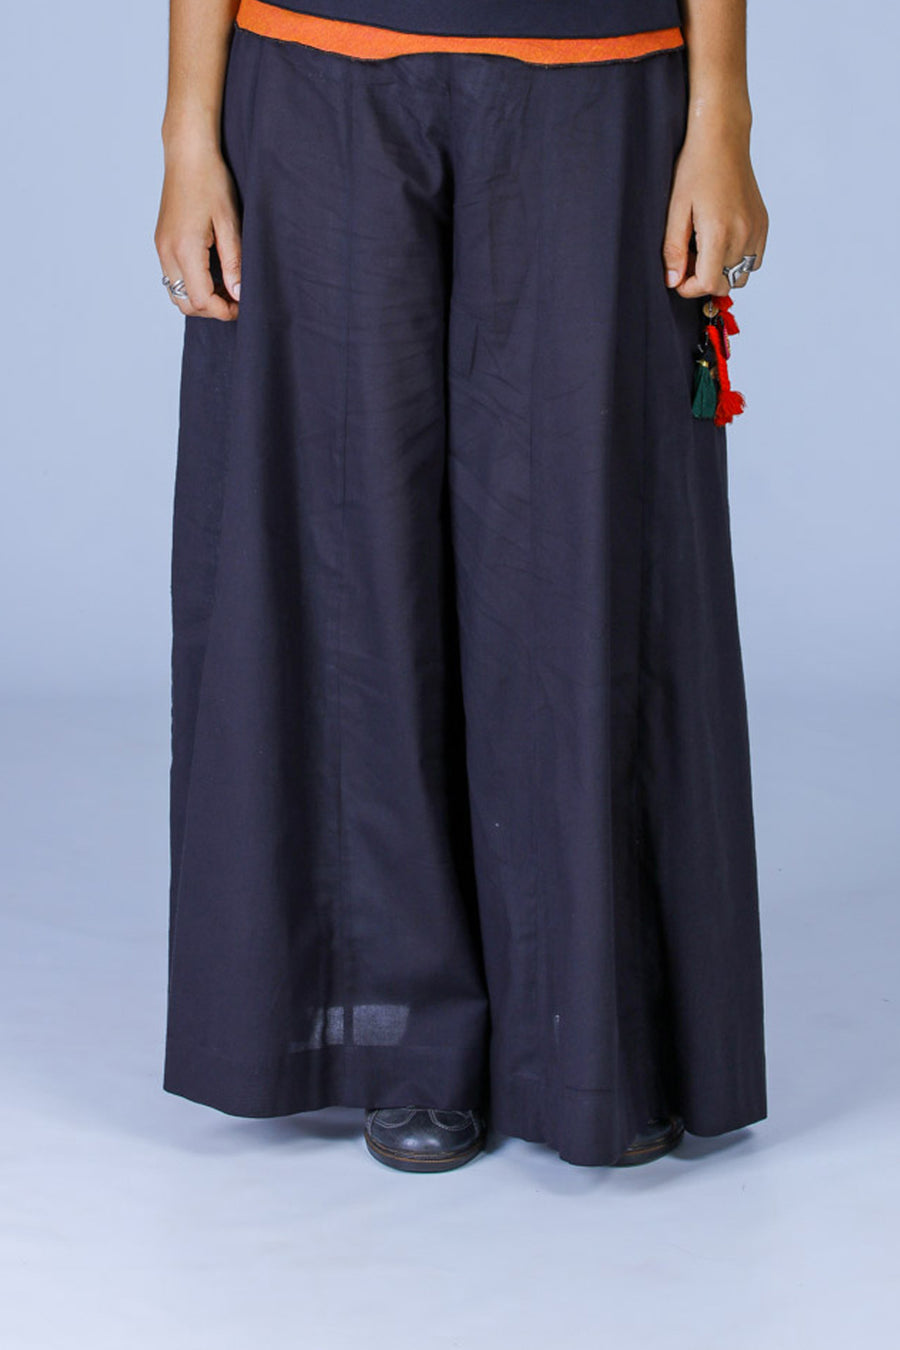 Mirror Embroidery Work Palazzo Pant (Free Size) Navy Color - DARKBLACK  Style - 4074820